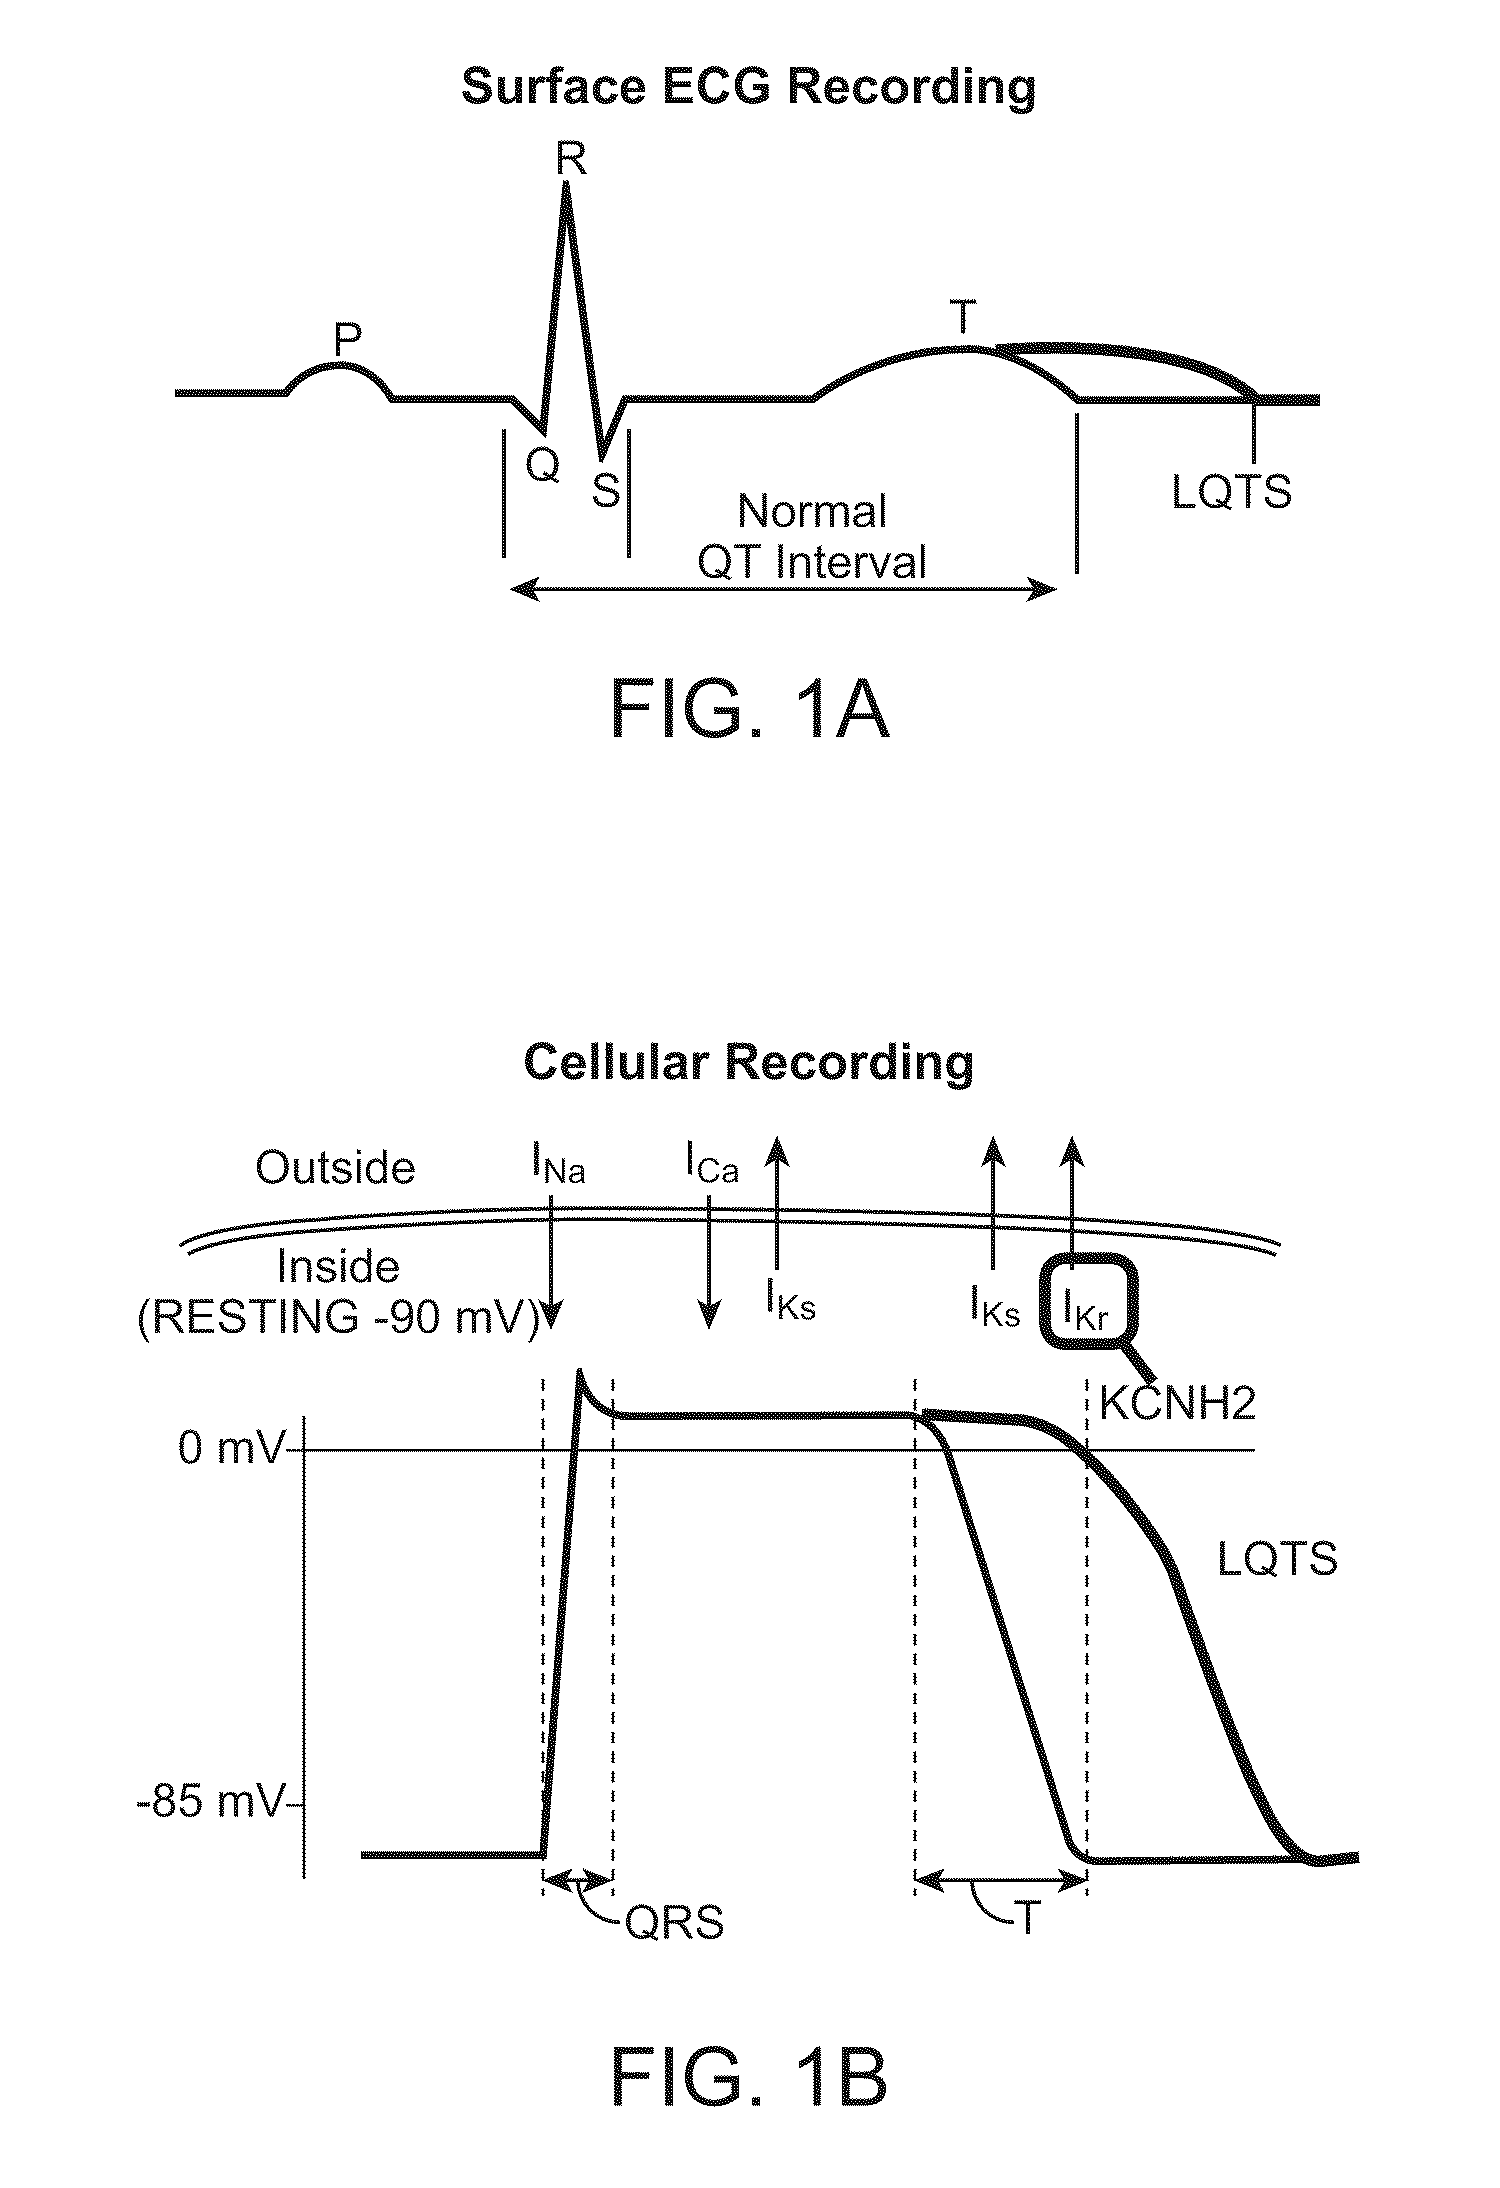 Cells and assays for use in detecting long qt syndrome